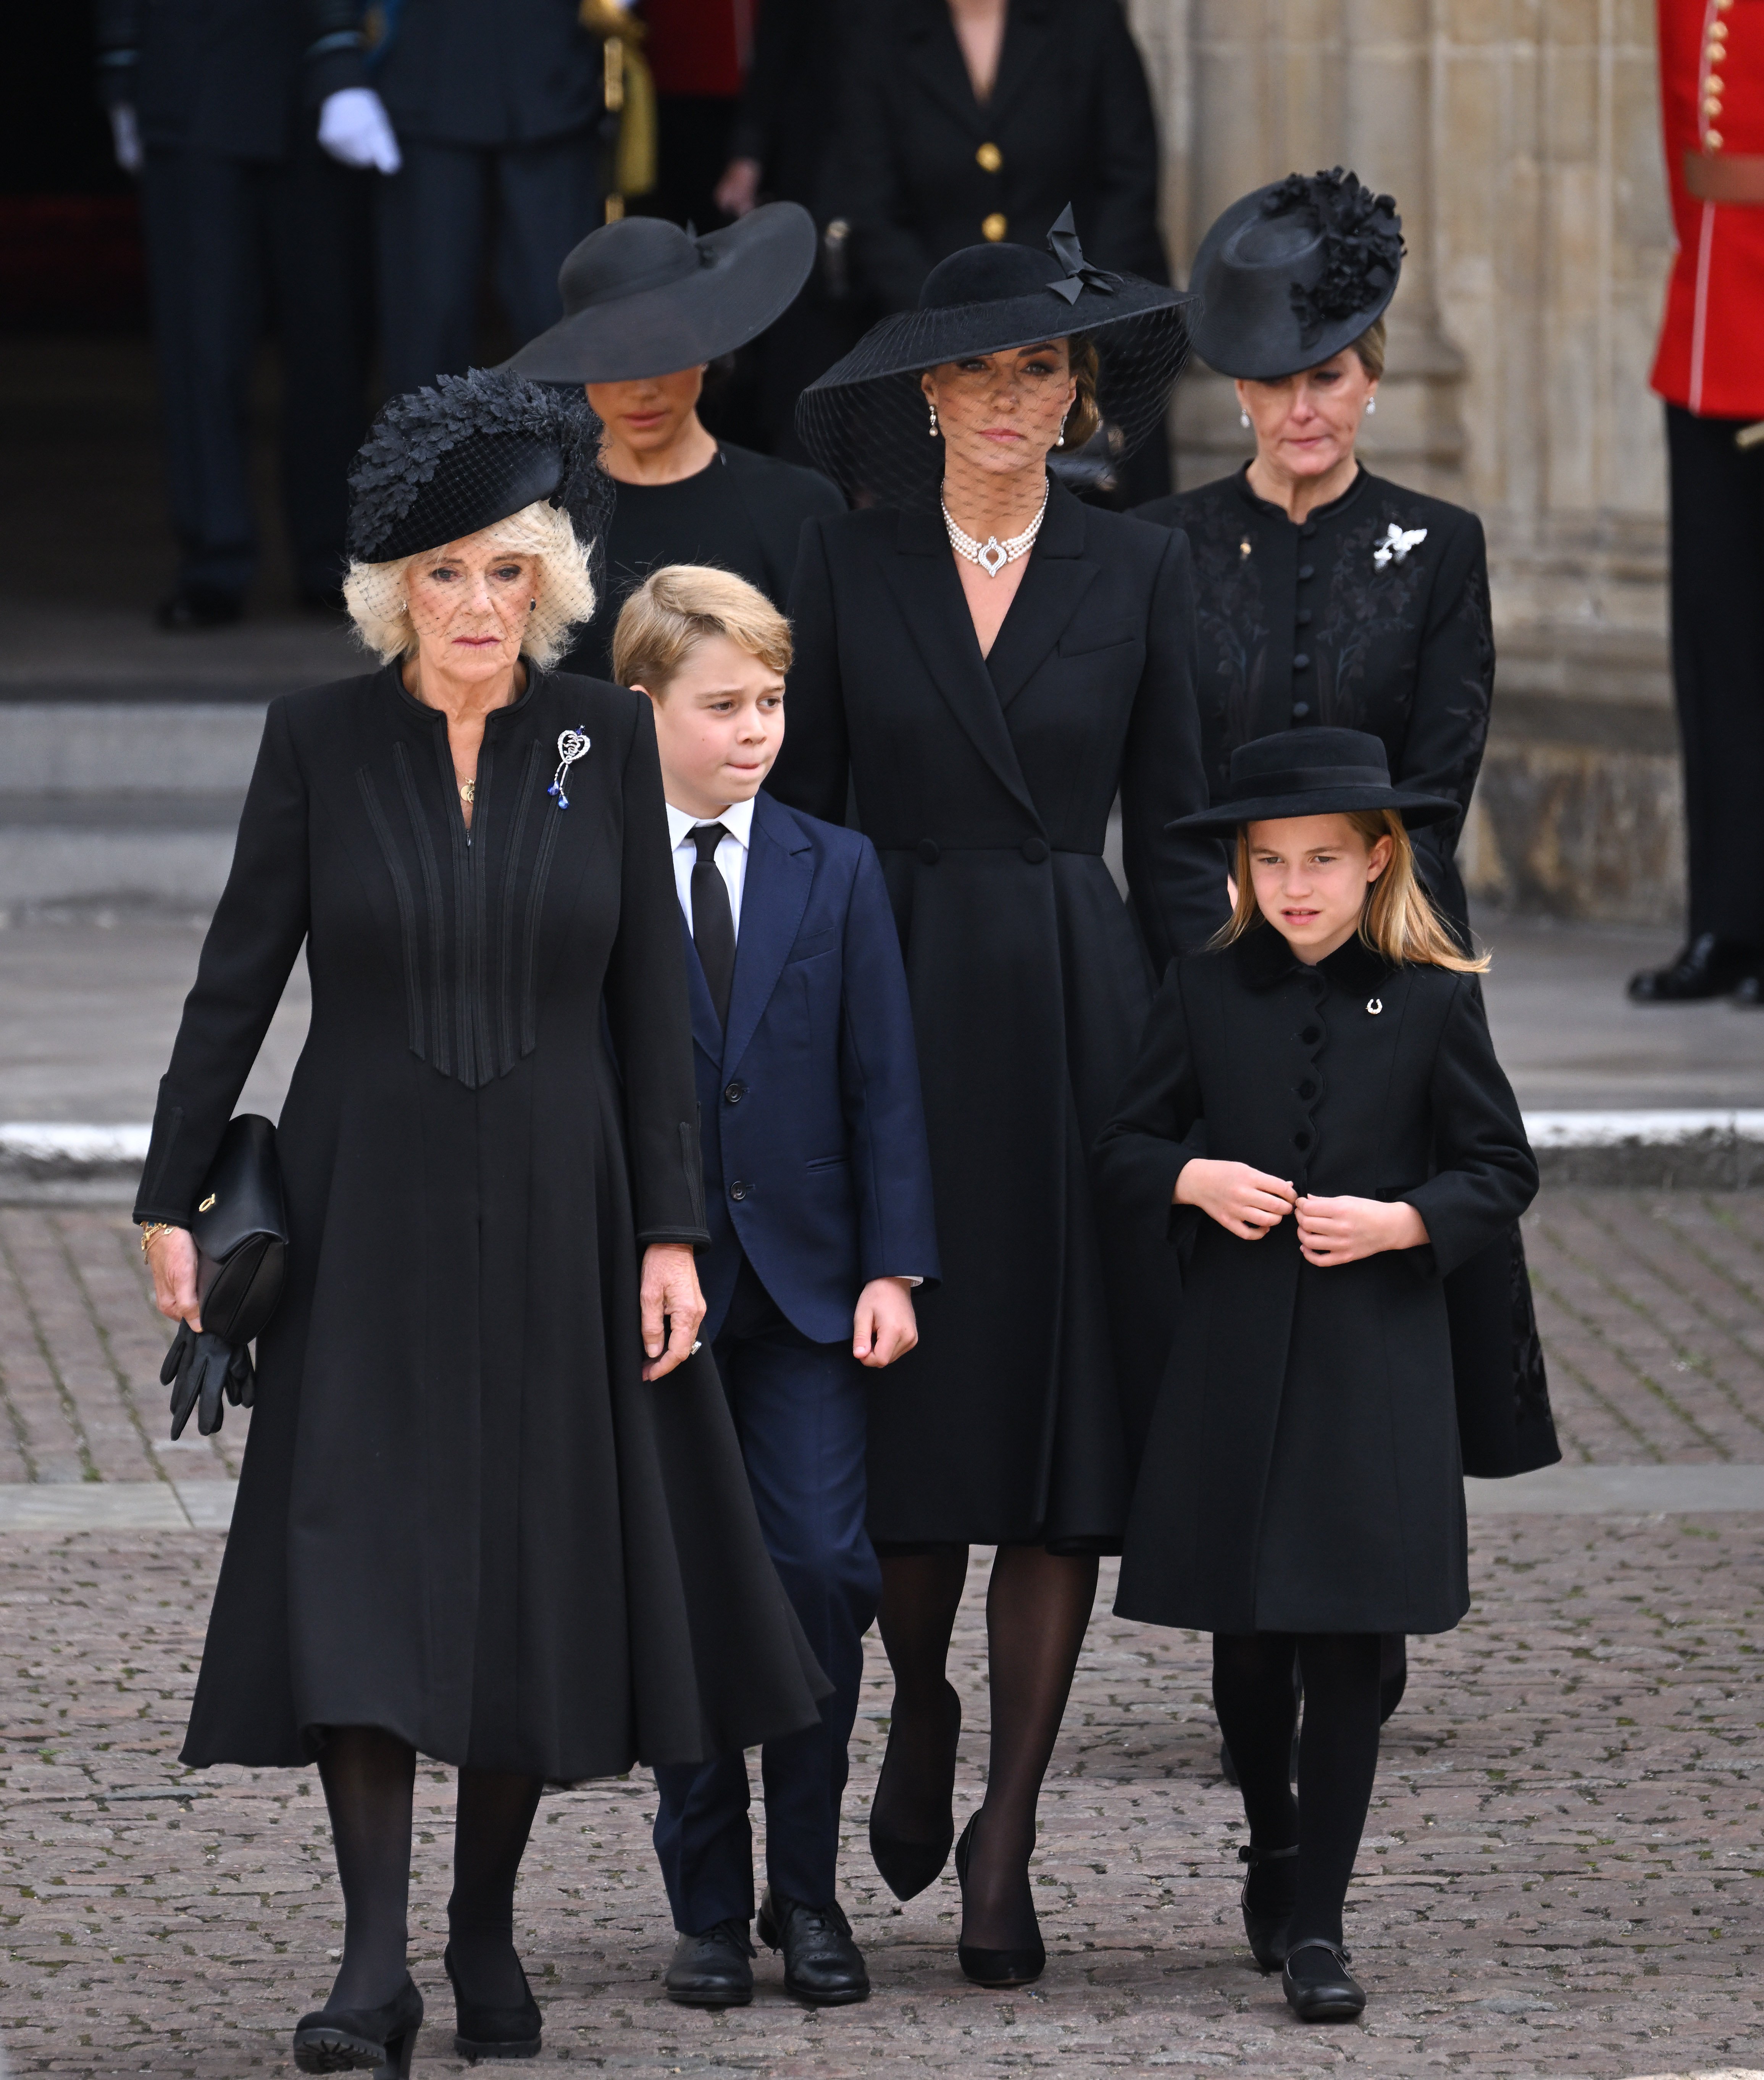 Amilla, Queen Consort, Meghan, Duchess of Sussex, Prince George of Wales, Catherine, Princess of Wales, Princess Charlotte of Wales, and Sophia, Countess of Wessex during Queen Elizabeth II's state funeral at Westminster Abbey on March 19. September 2022 in London, England |  Source: Getty Images 